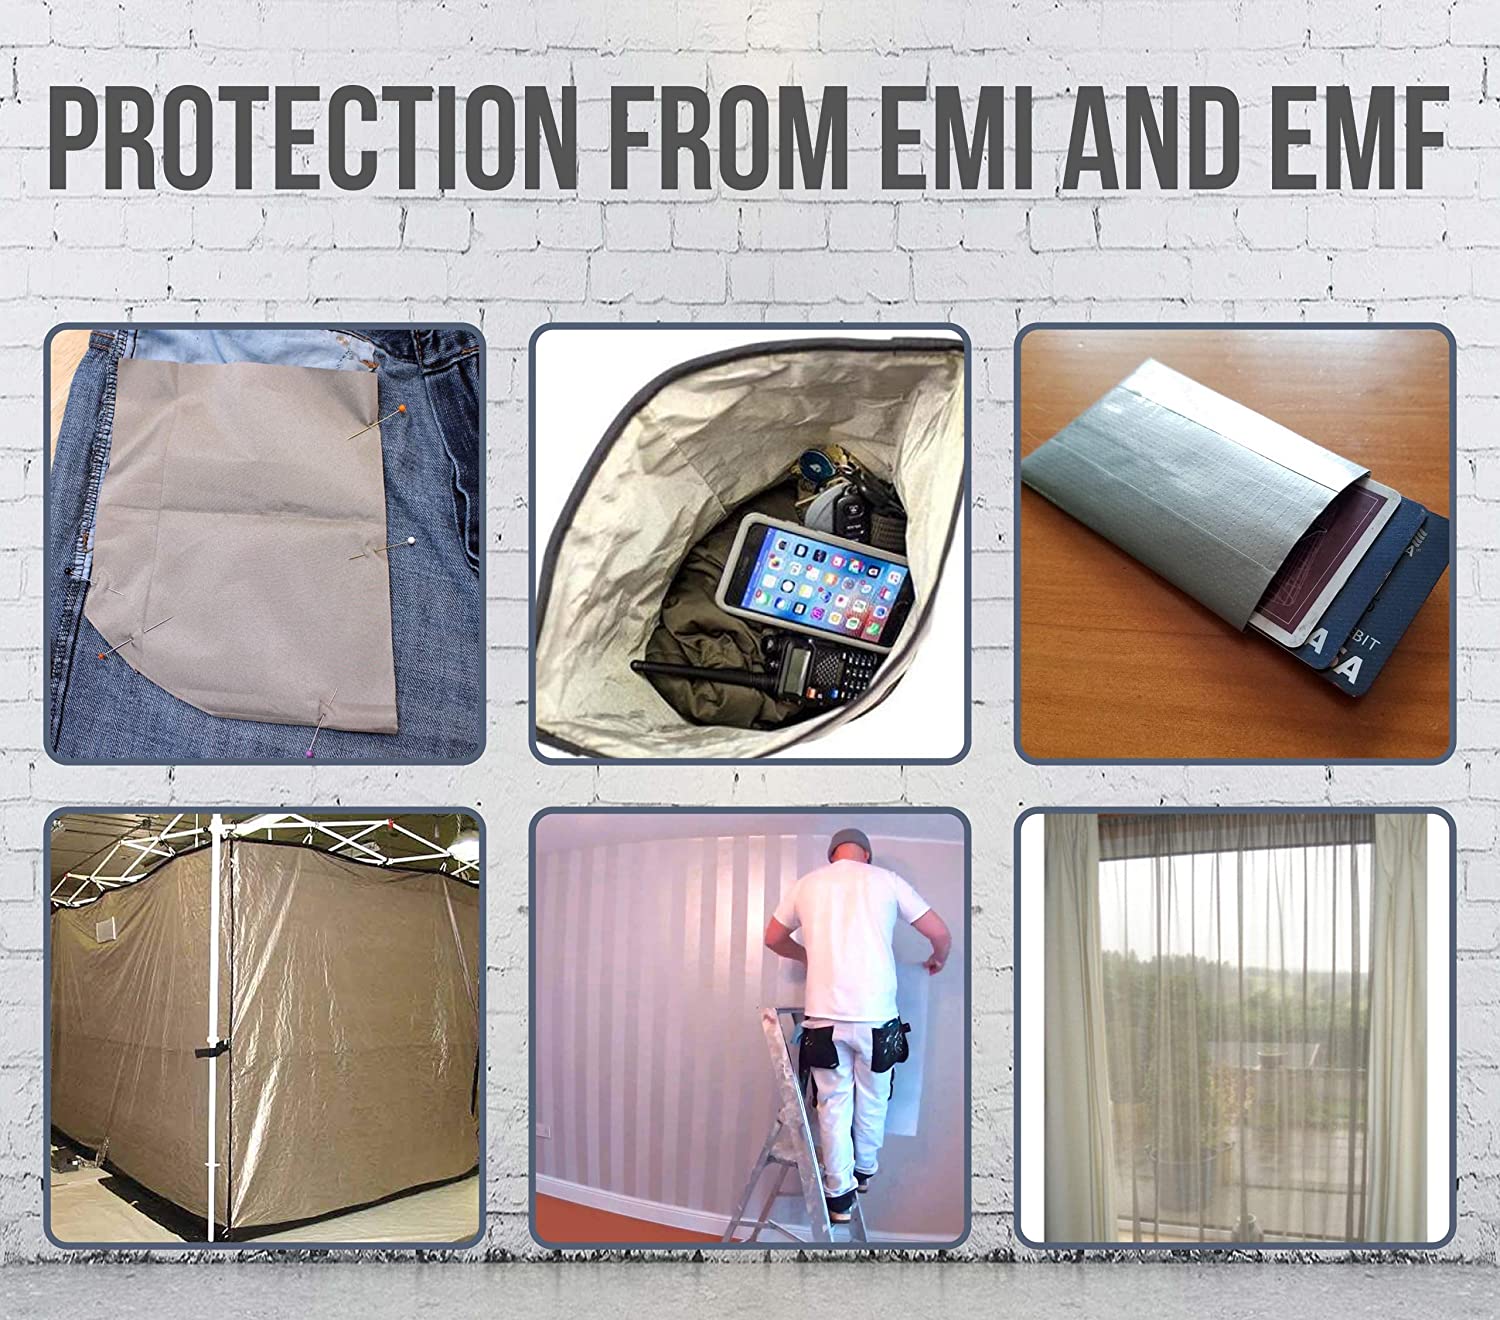 EMF Solution - Faraday Bags Protect Your Privacy - Realyou Store